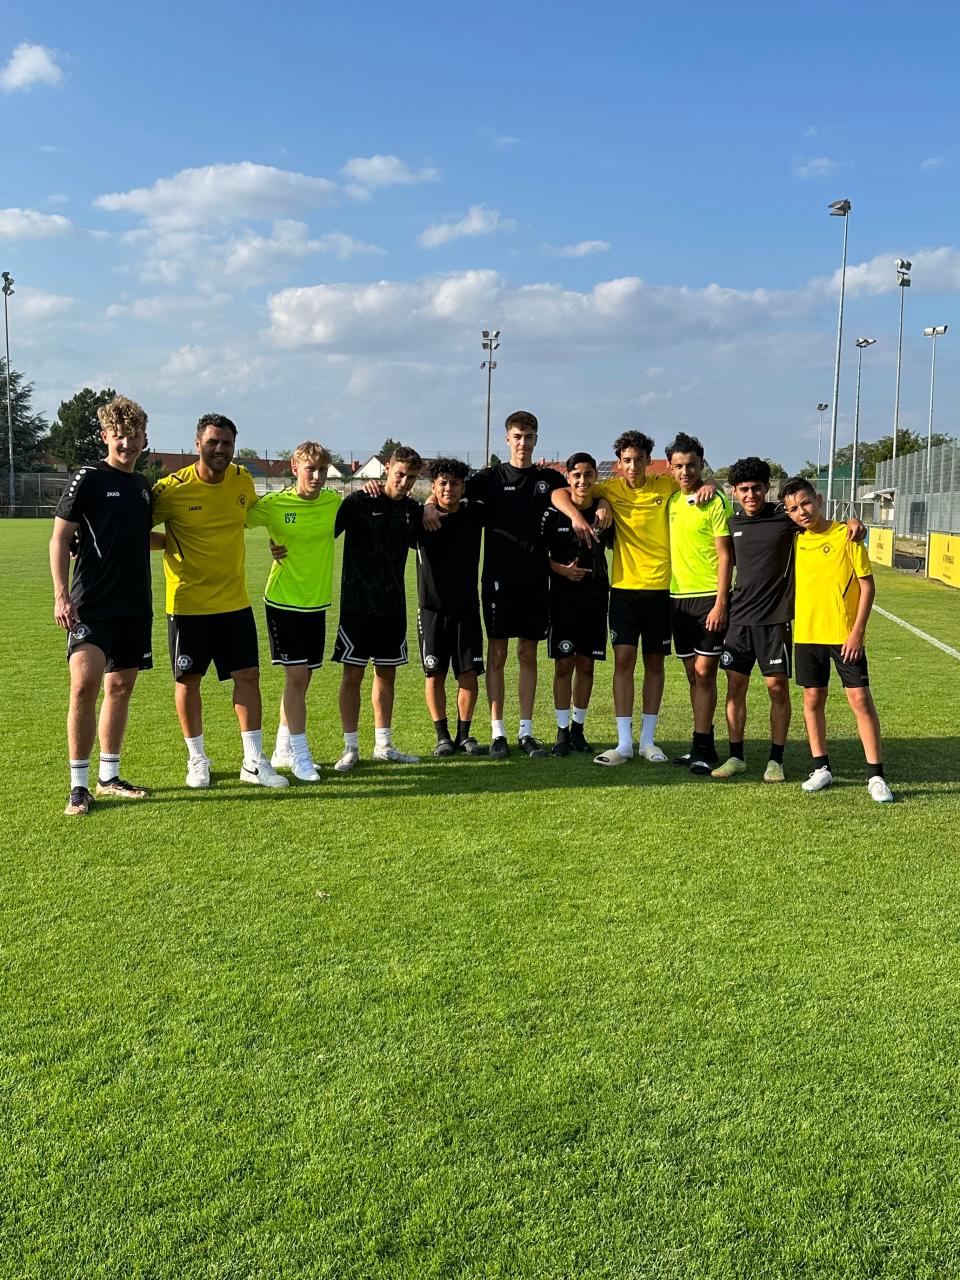 Angelo Vieyra and Giovanni Medina pose in photo alongside other youth soccer players who participated in the Moki Fussballakademie youth soccer trial in Germany.